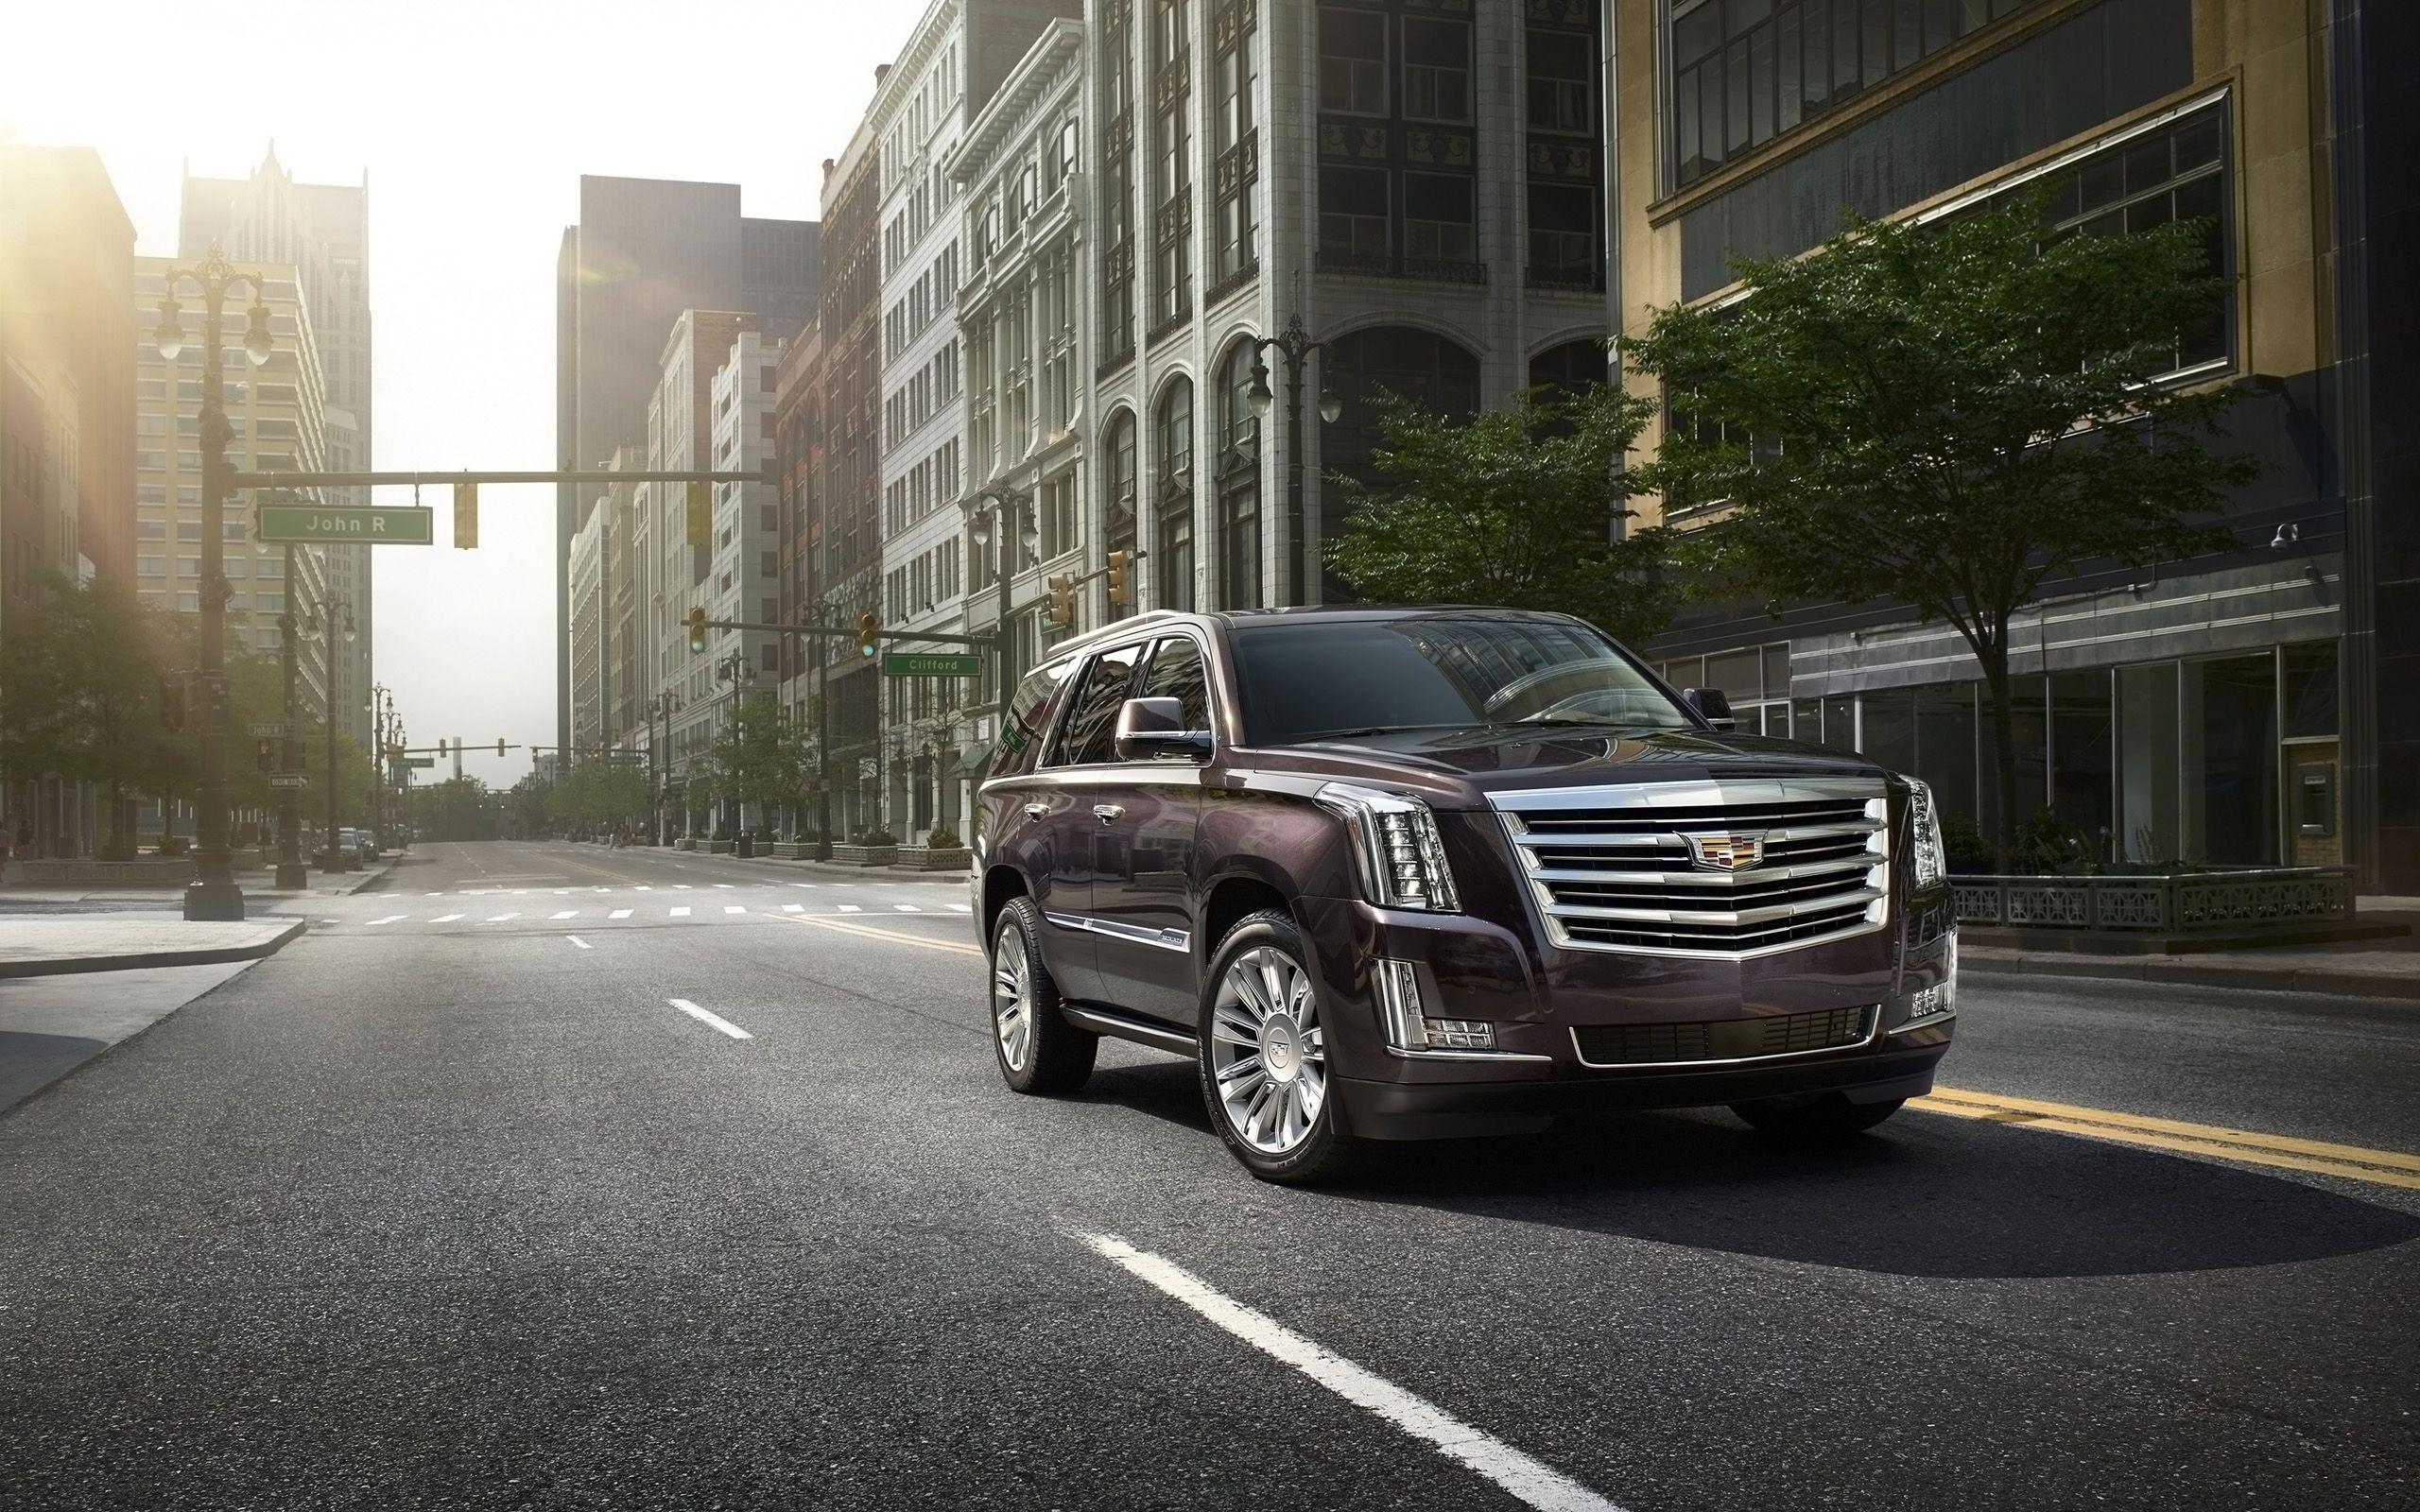 Interesting Cadillac Escalade HDQ Image Collection, HQ Definition